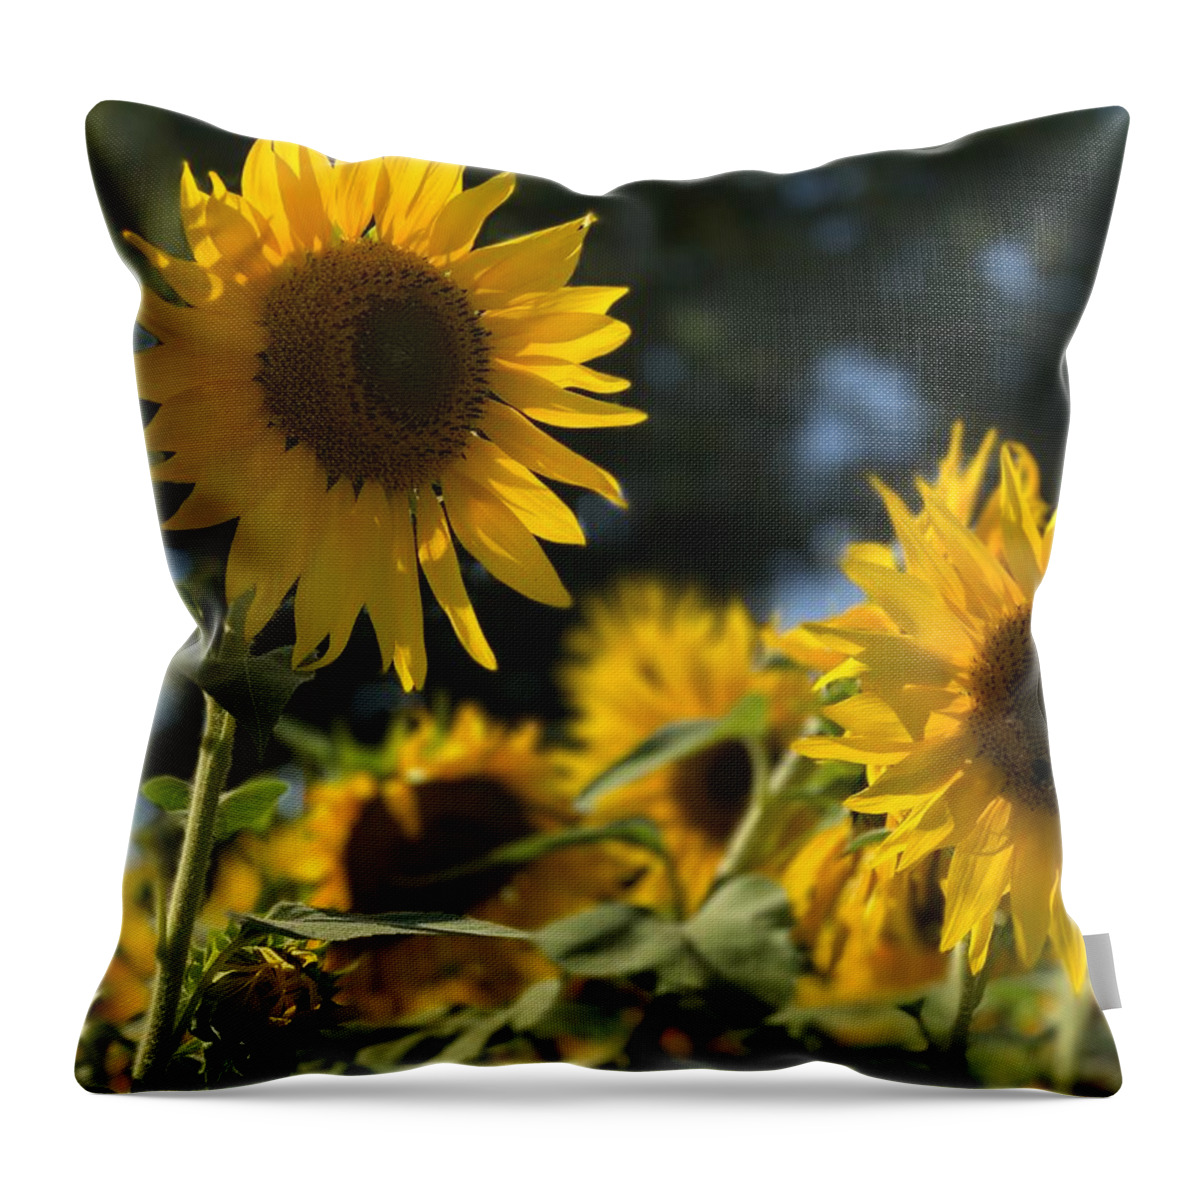 Sunflowers Throw Pillow featuring the photograph Sweet Sunflowers by Lora J Wilson